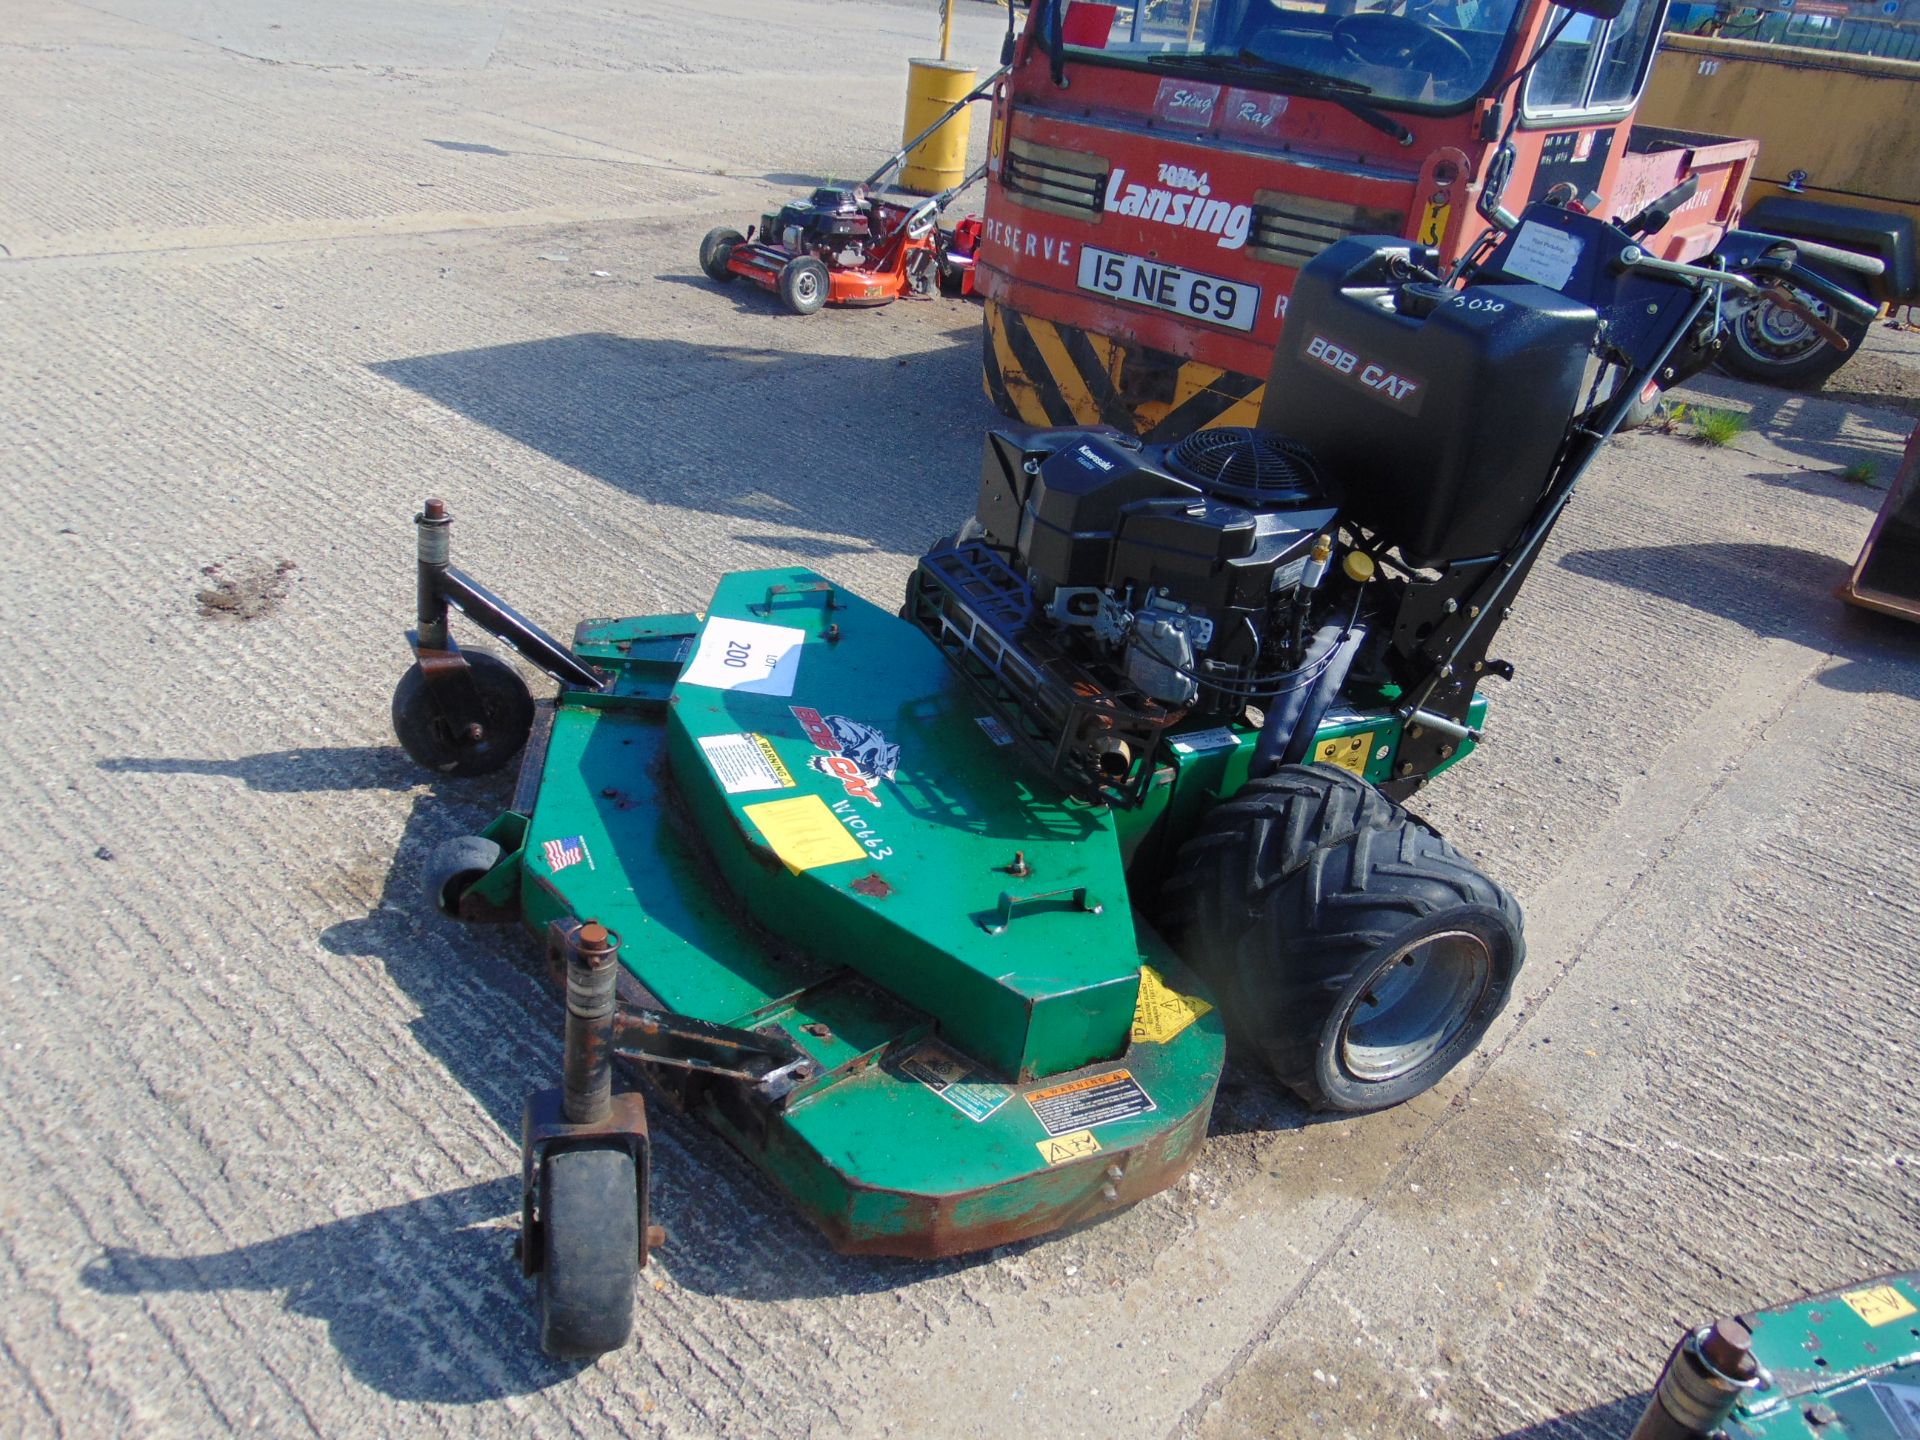 2015 BOBCAT HYDRODRIVE 52 INCHES MOWER FROM UK GOVT CONTRACT. 1000 HOURS ONLY - Image 2 of 9